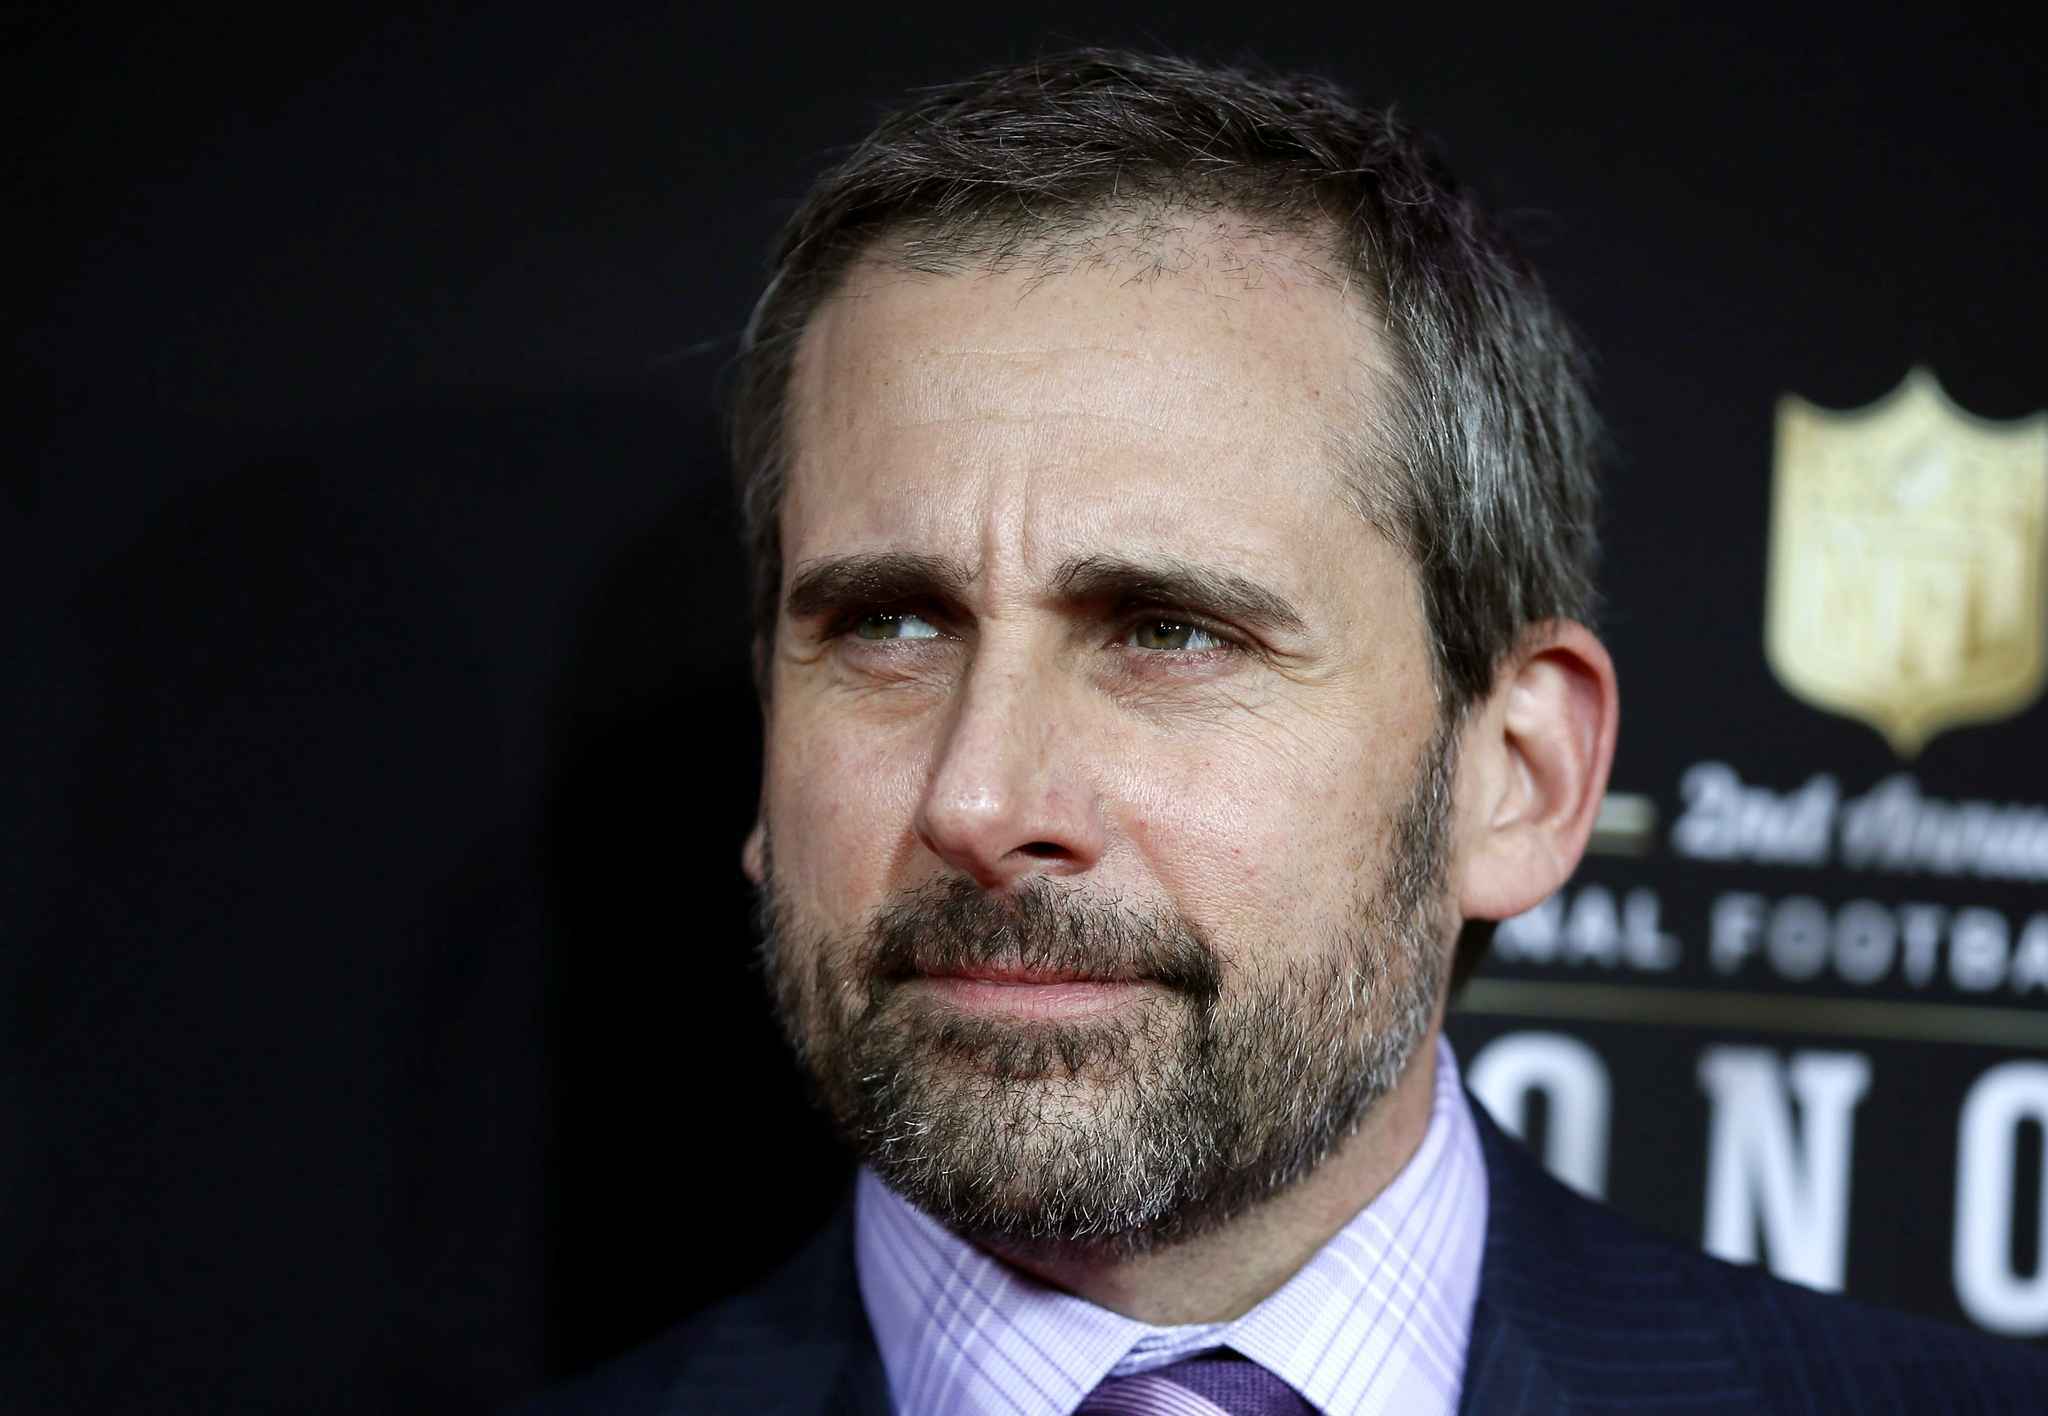 Steve Carell Wallpaper Image Photo Picture Background